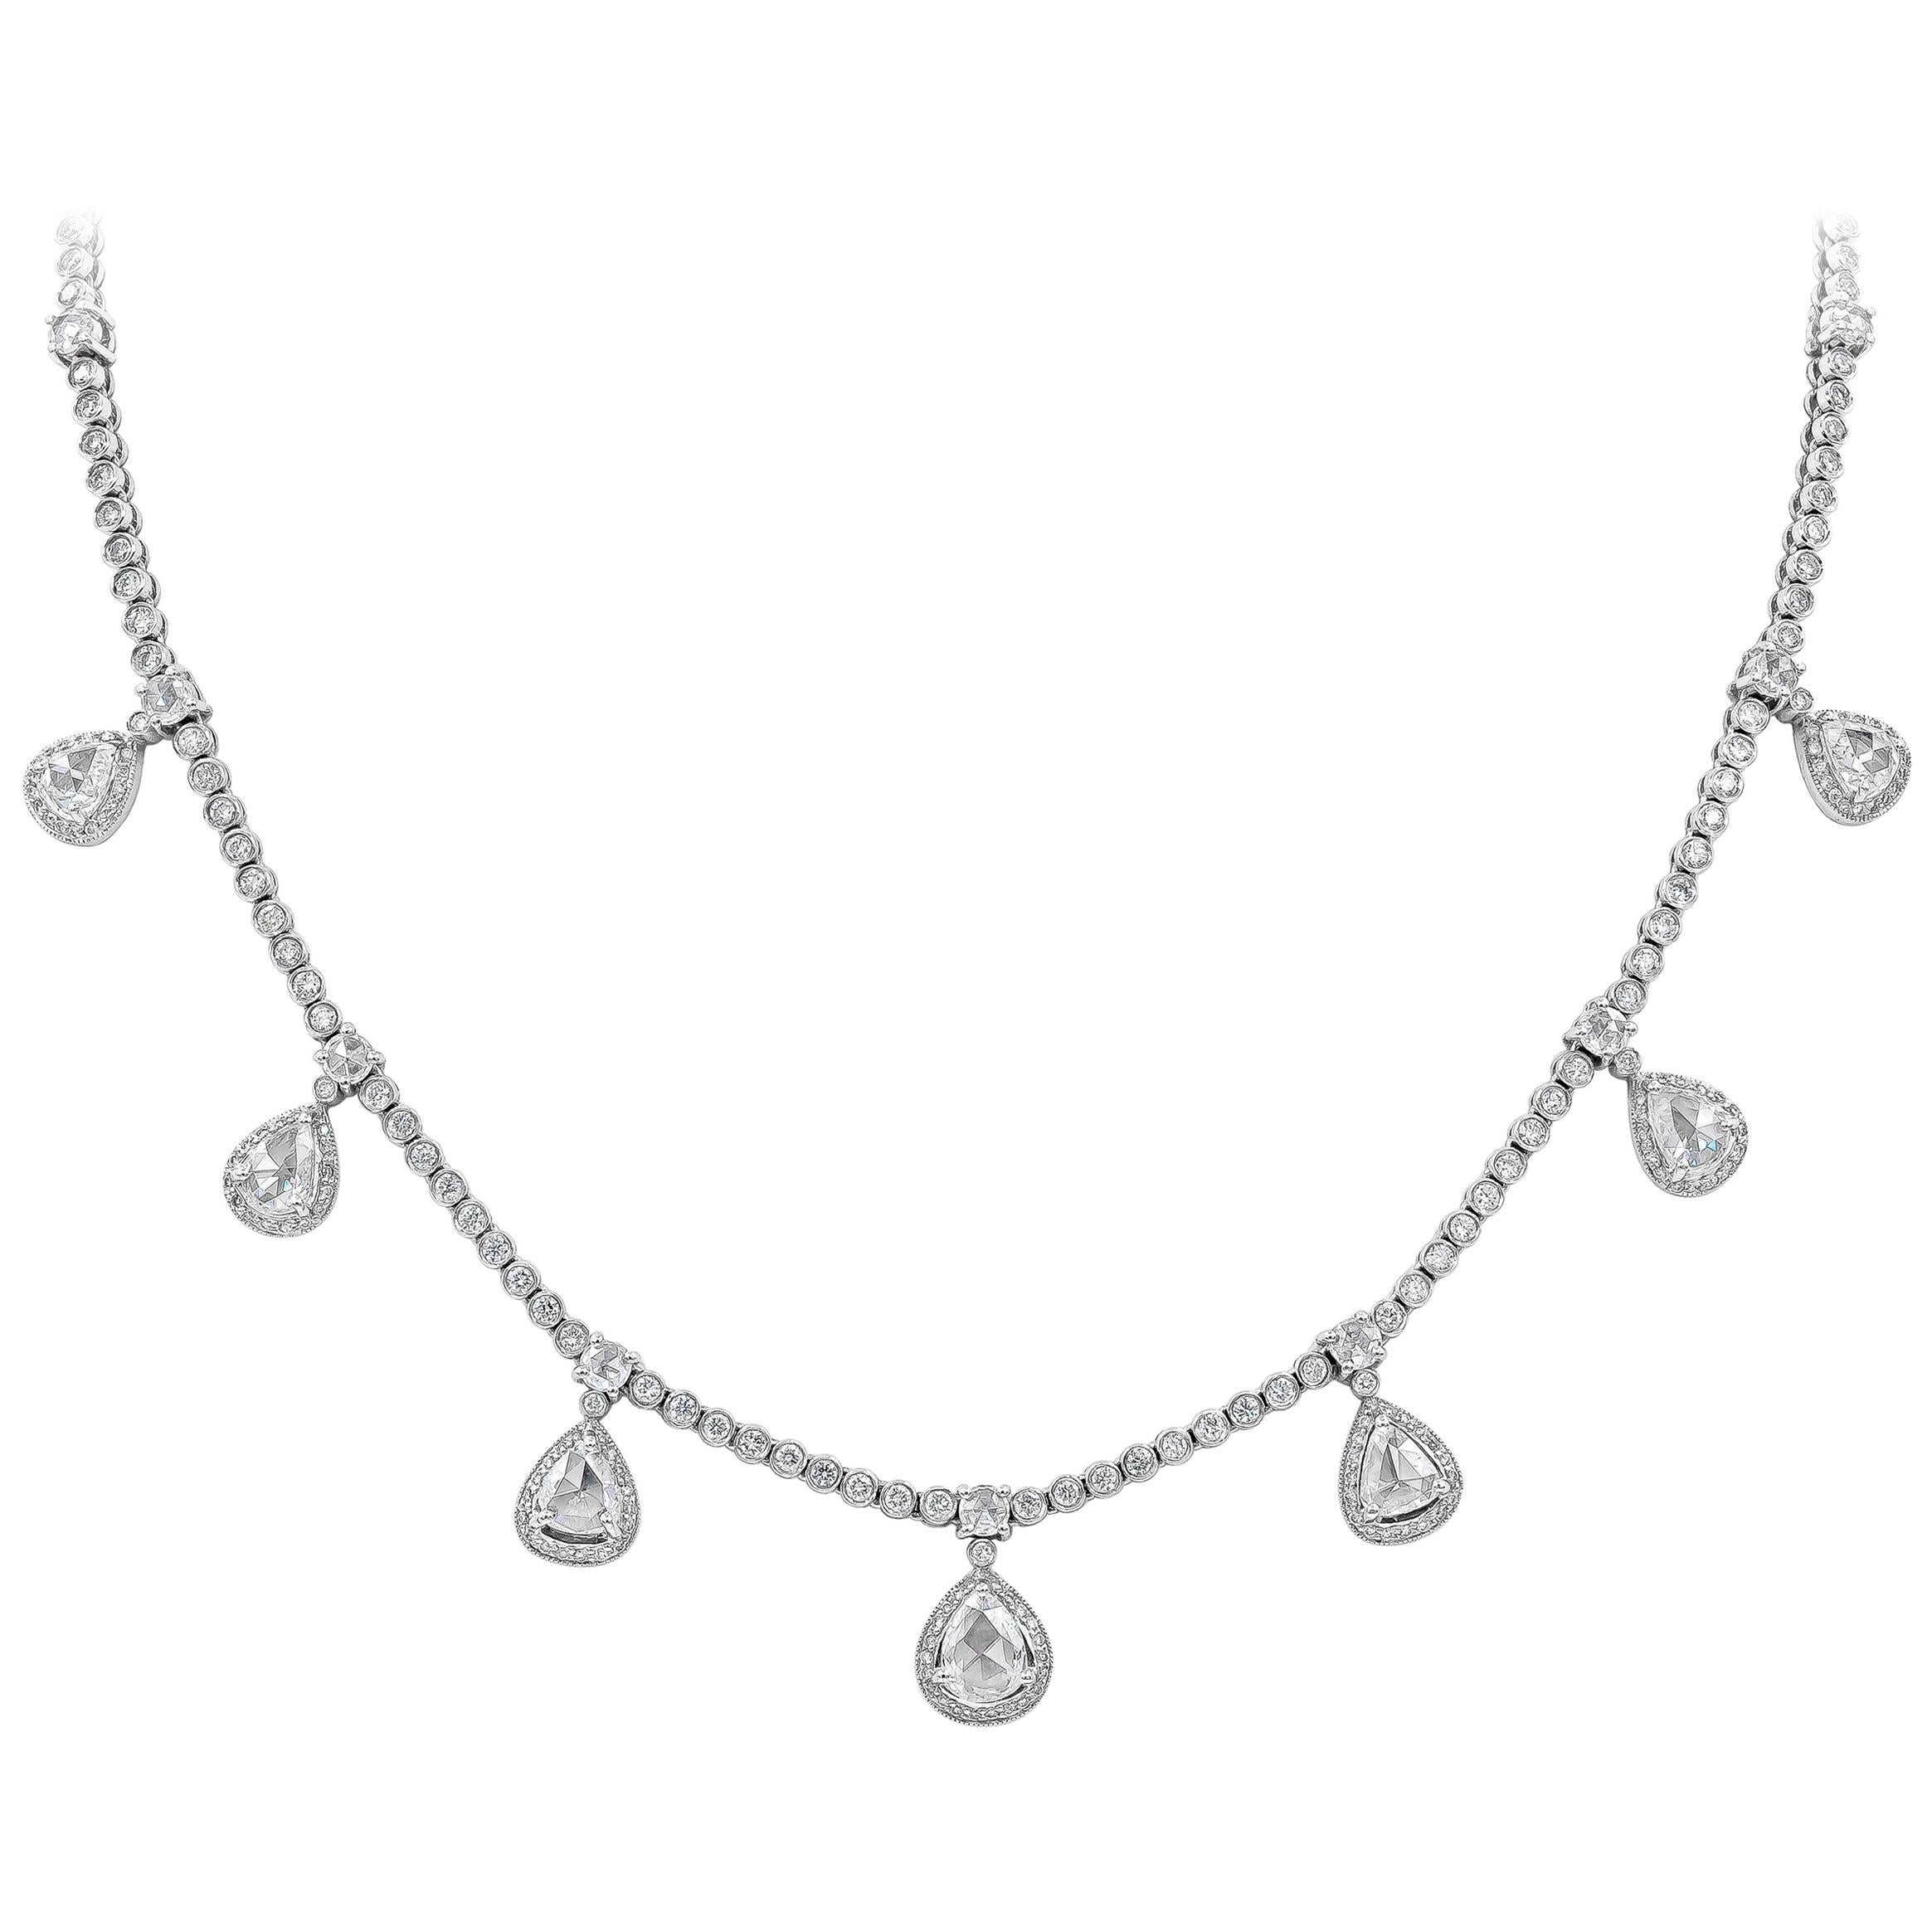 Roman Malakov 7.13 Carat Total Round and Rose Cut Diamond Fringe Tennis Necklace For Sale